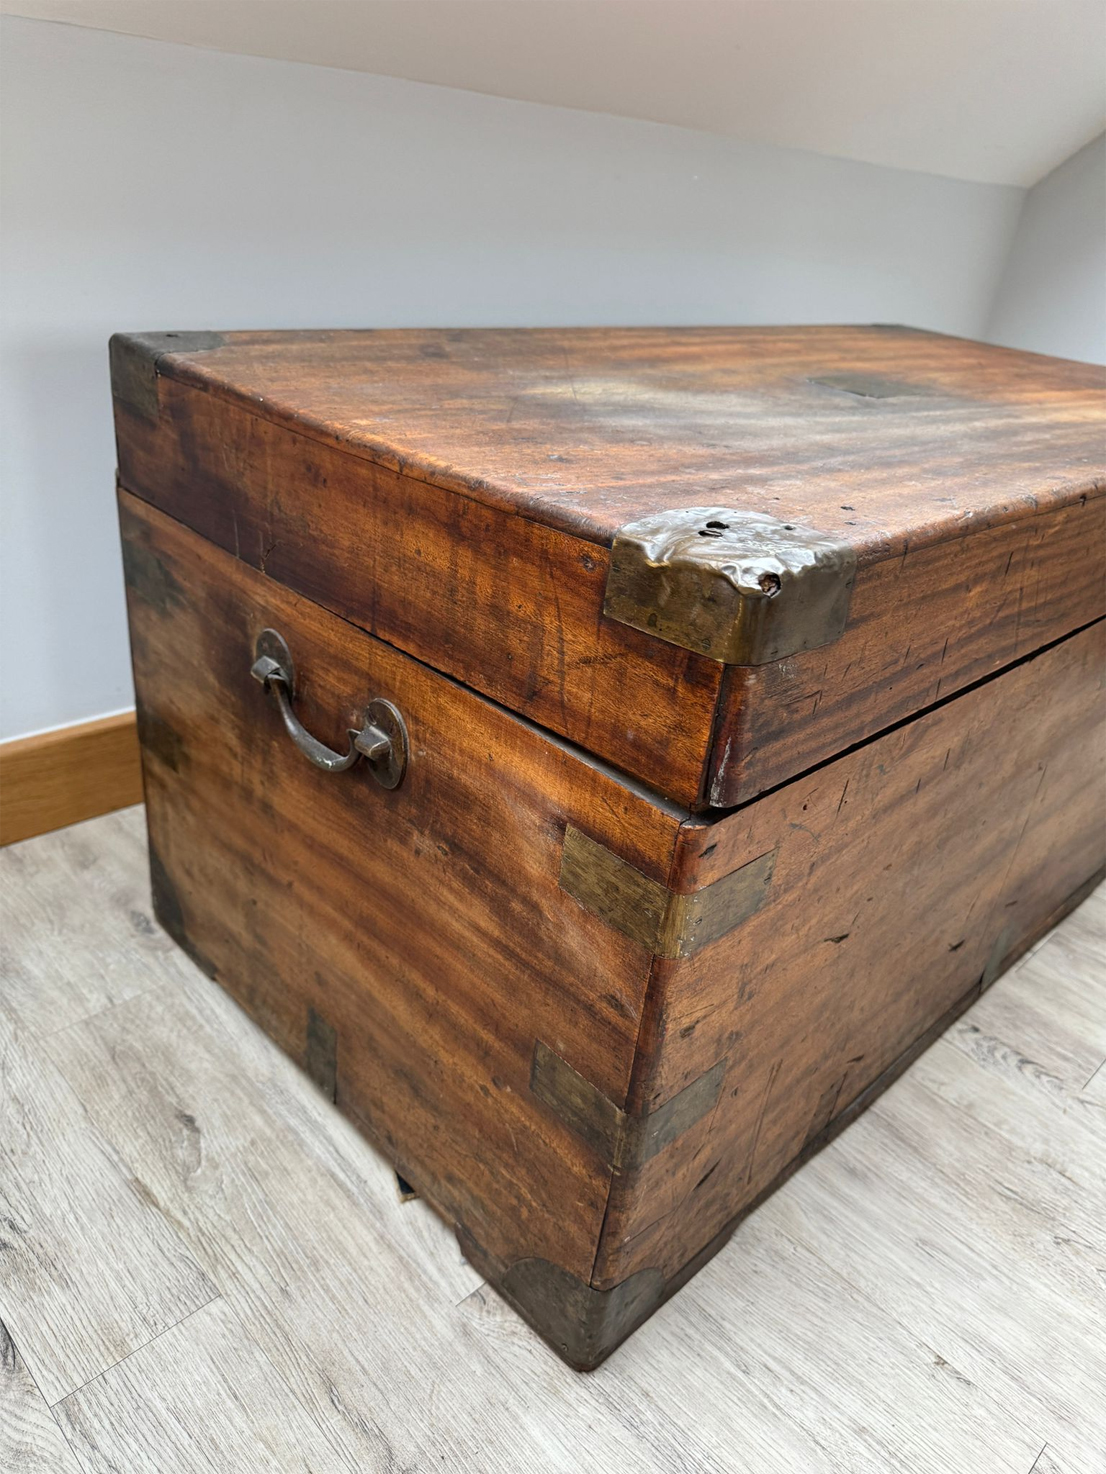 SOLID WOODEN CHEST WITH BRASS CORNER PLATES AND BRASS HANDLES 19" H X 16" D X 20" W - Image 2 of 3